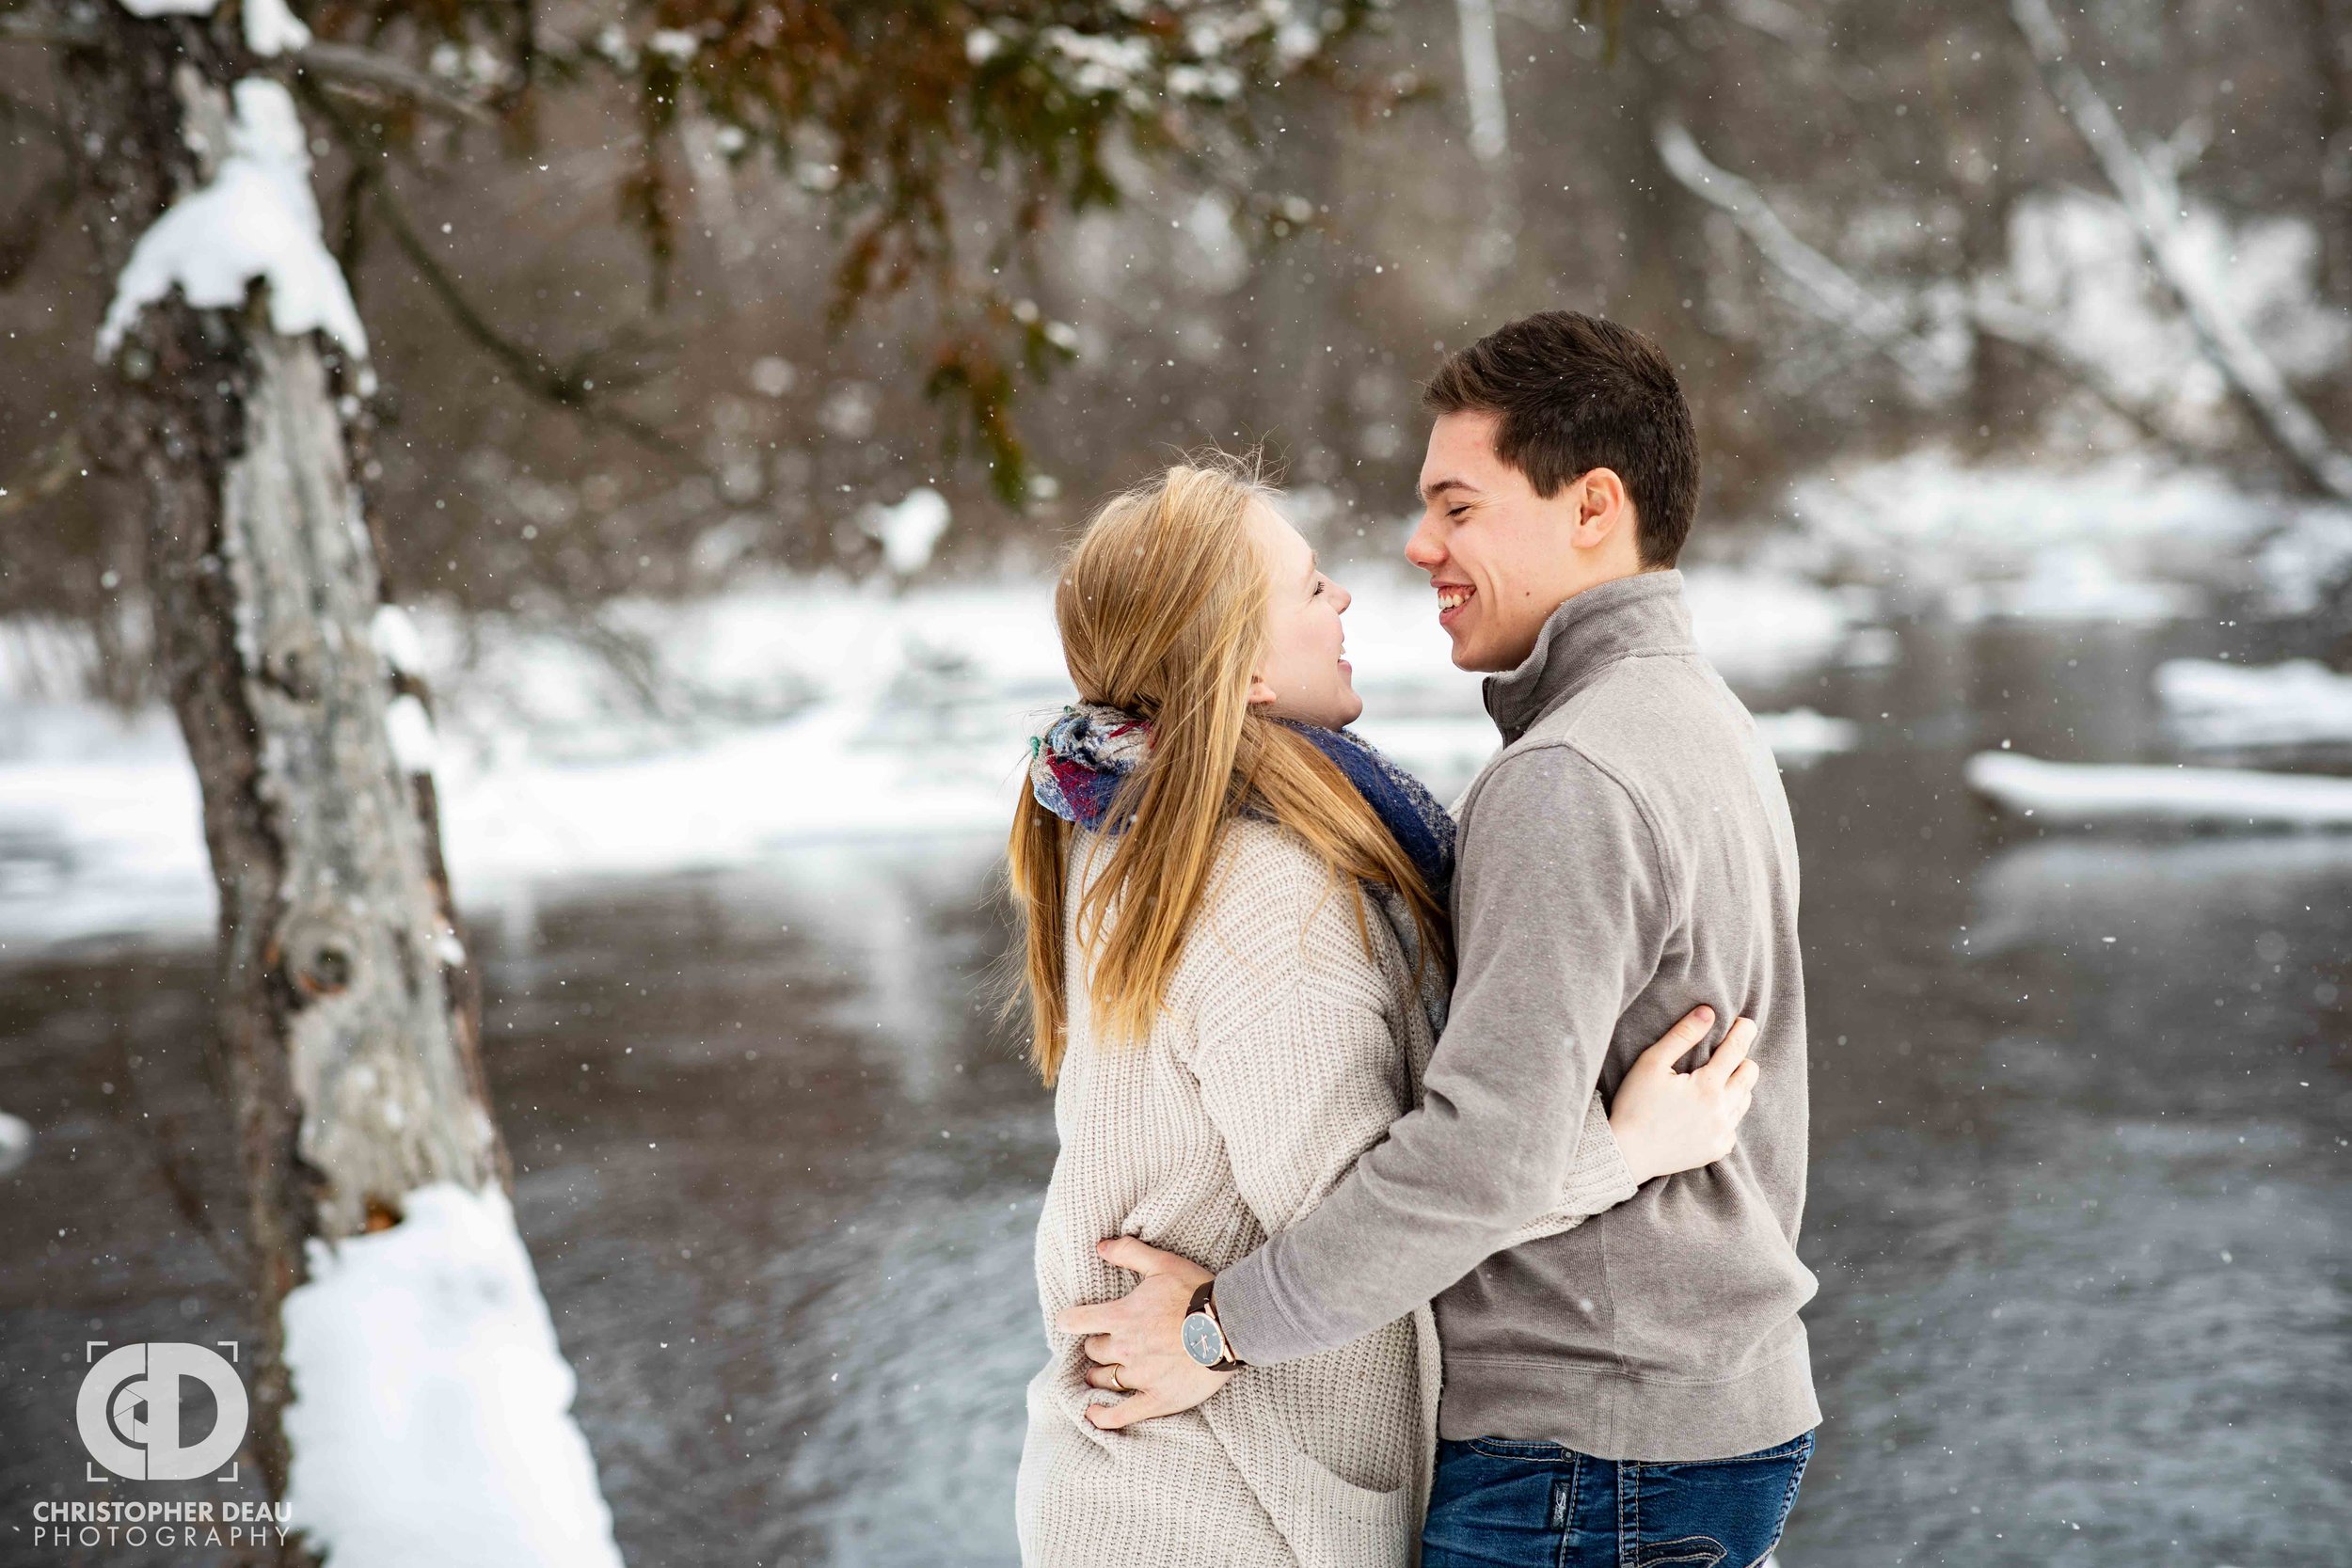  Michigan winter stream in Kalamazoo for engagement session 